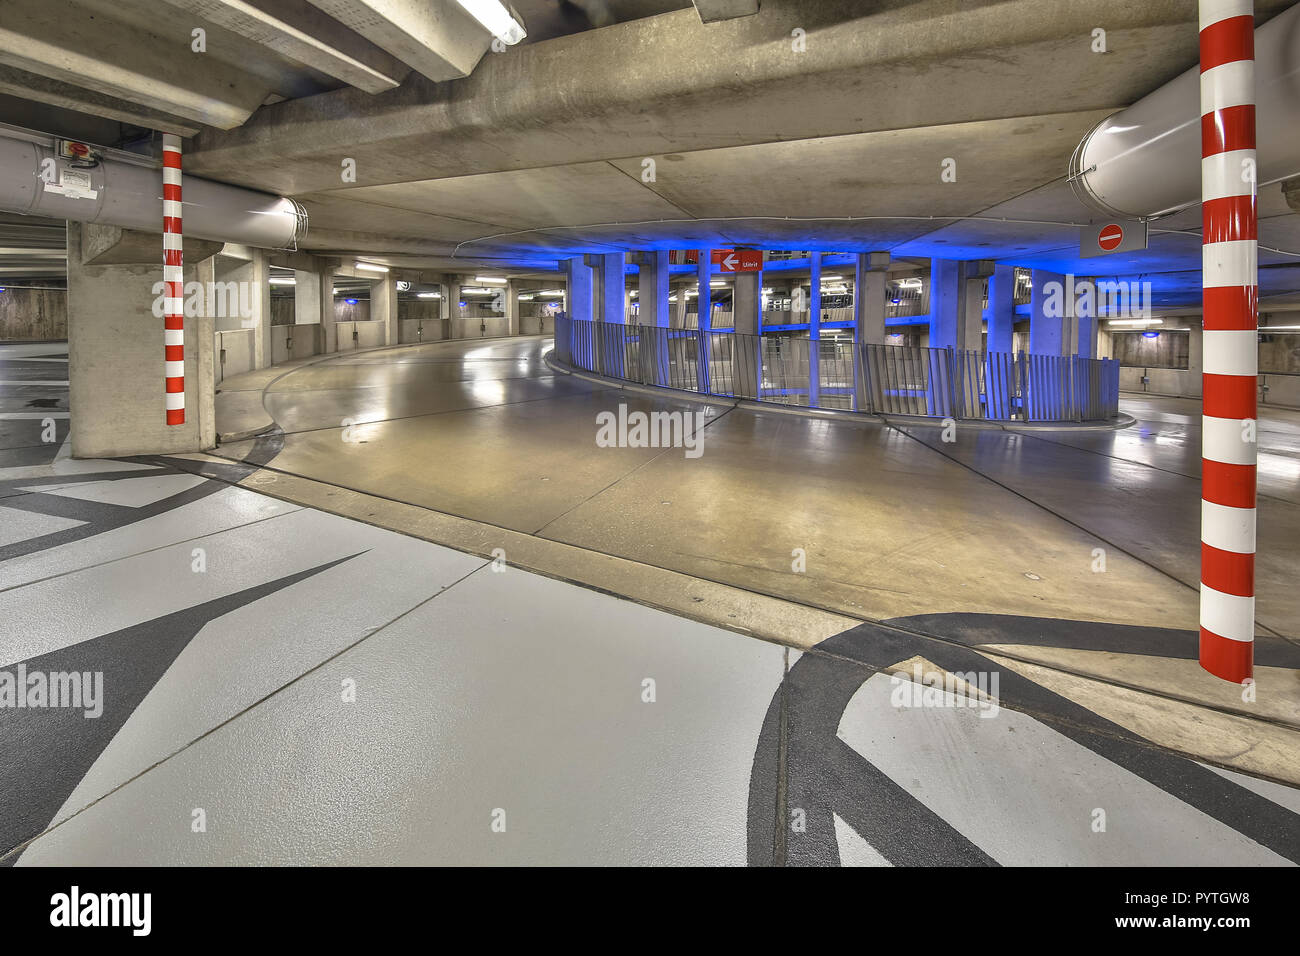 Empty ramp in circular underground parking garage with colorful lighting under a downtown shopping mall Stock Photo